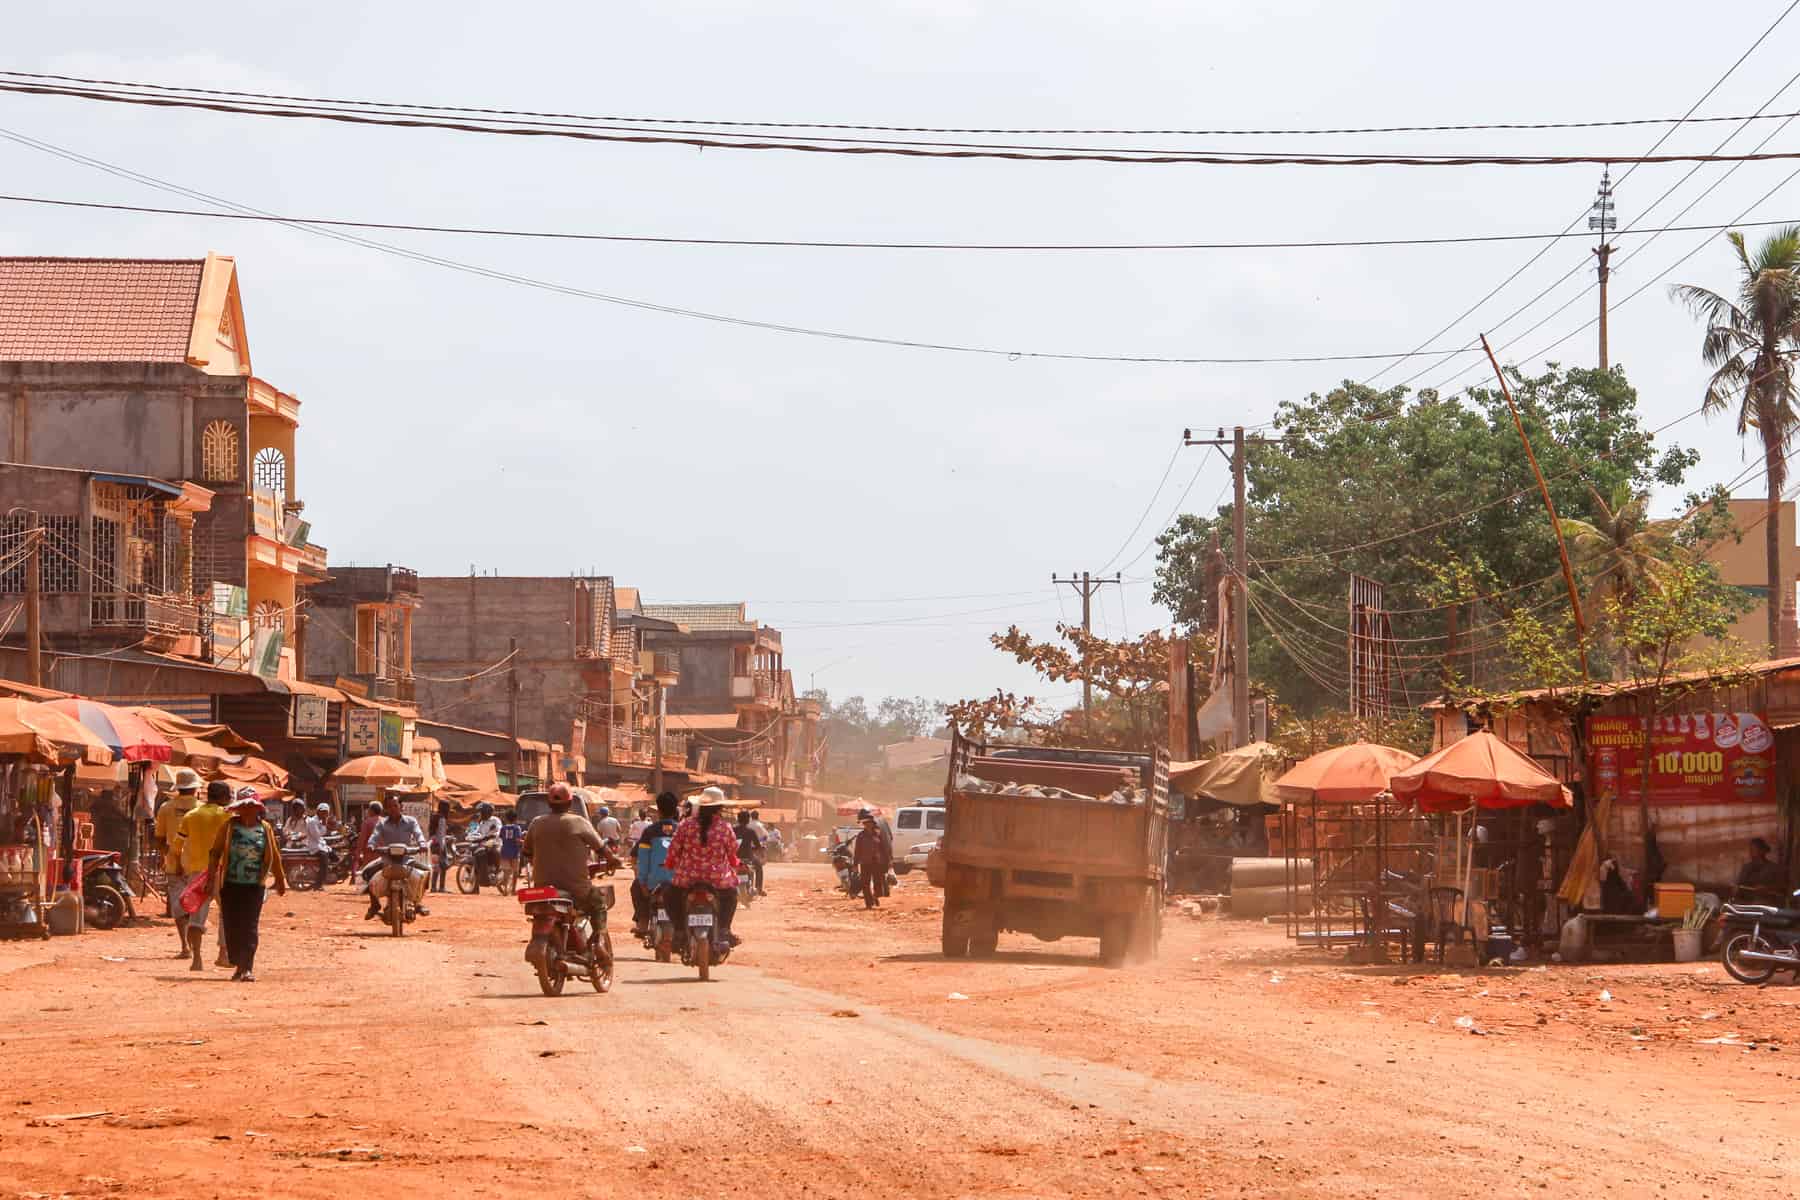 People, motorbikes, trucks and street stalls fill a wide street covered in ochre orange dusty sand. As are the buildings that line the street. 